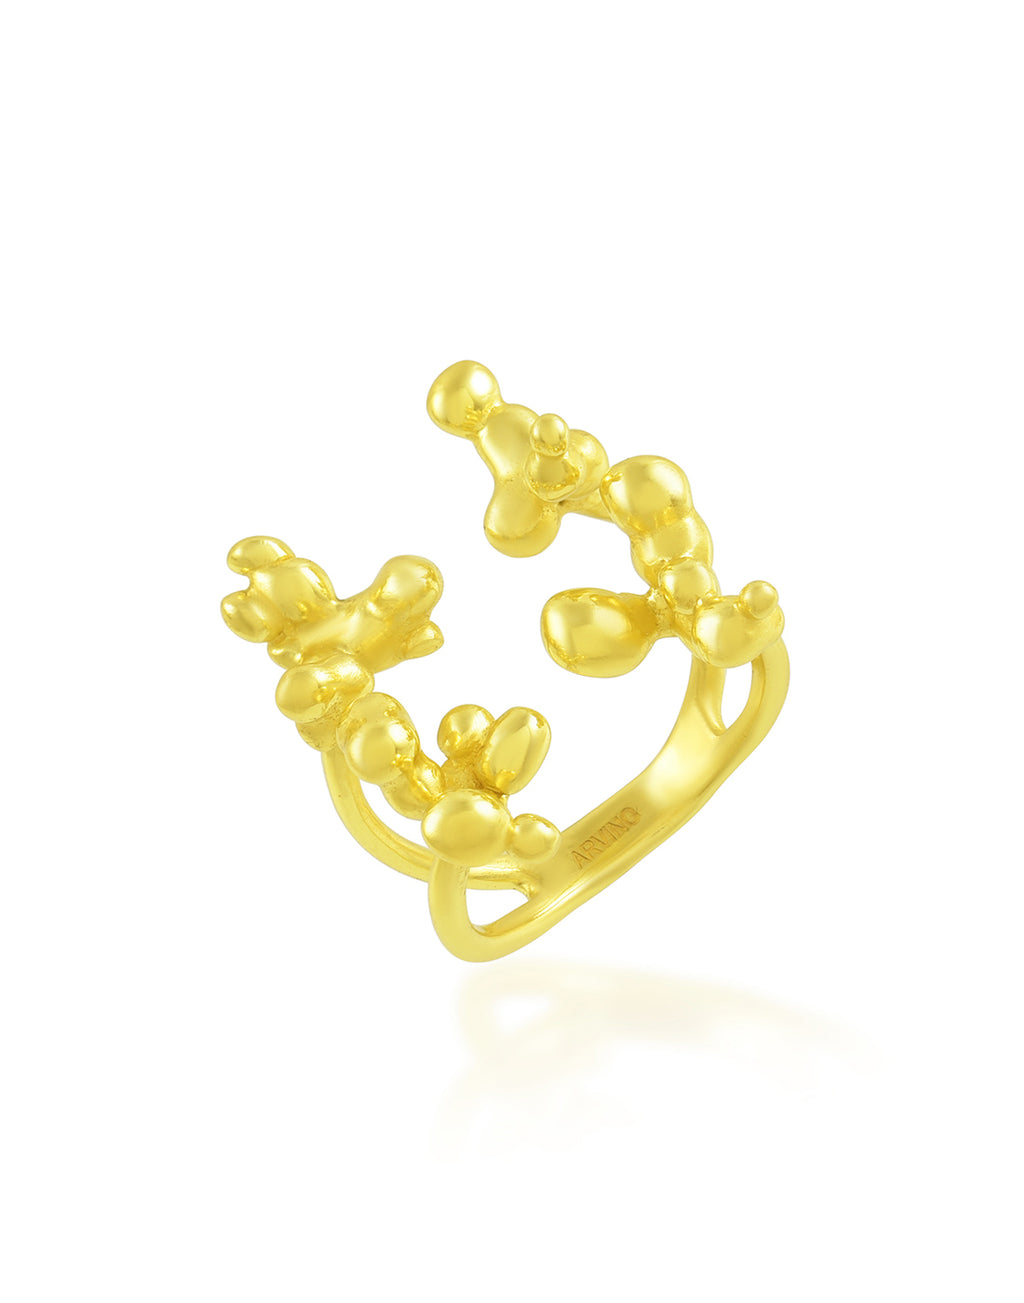 Pellet Ring - Statement Rings - Gold-Plated & Hypoallergenic Jewellery - Made in India - Dubai Jewellery - Dori